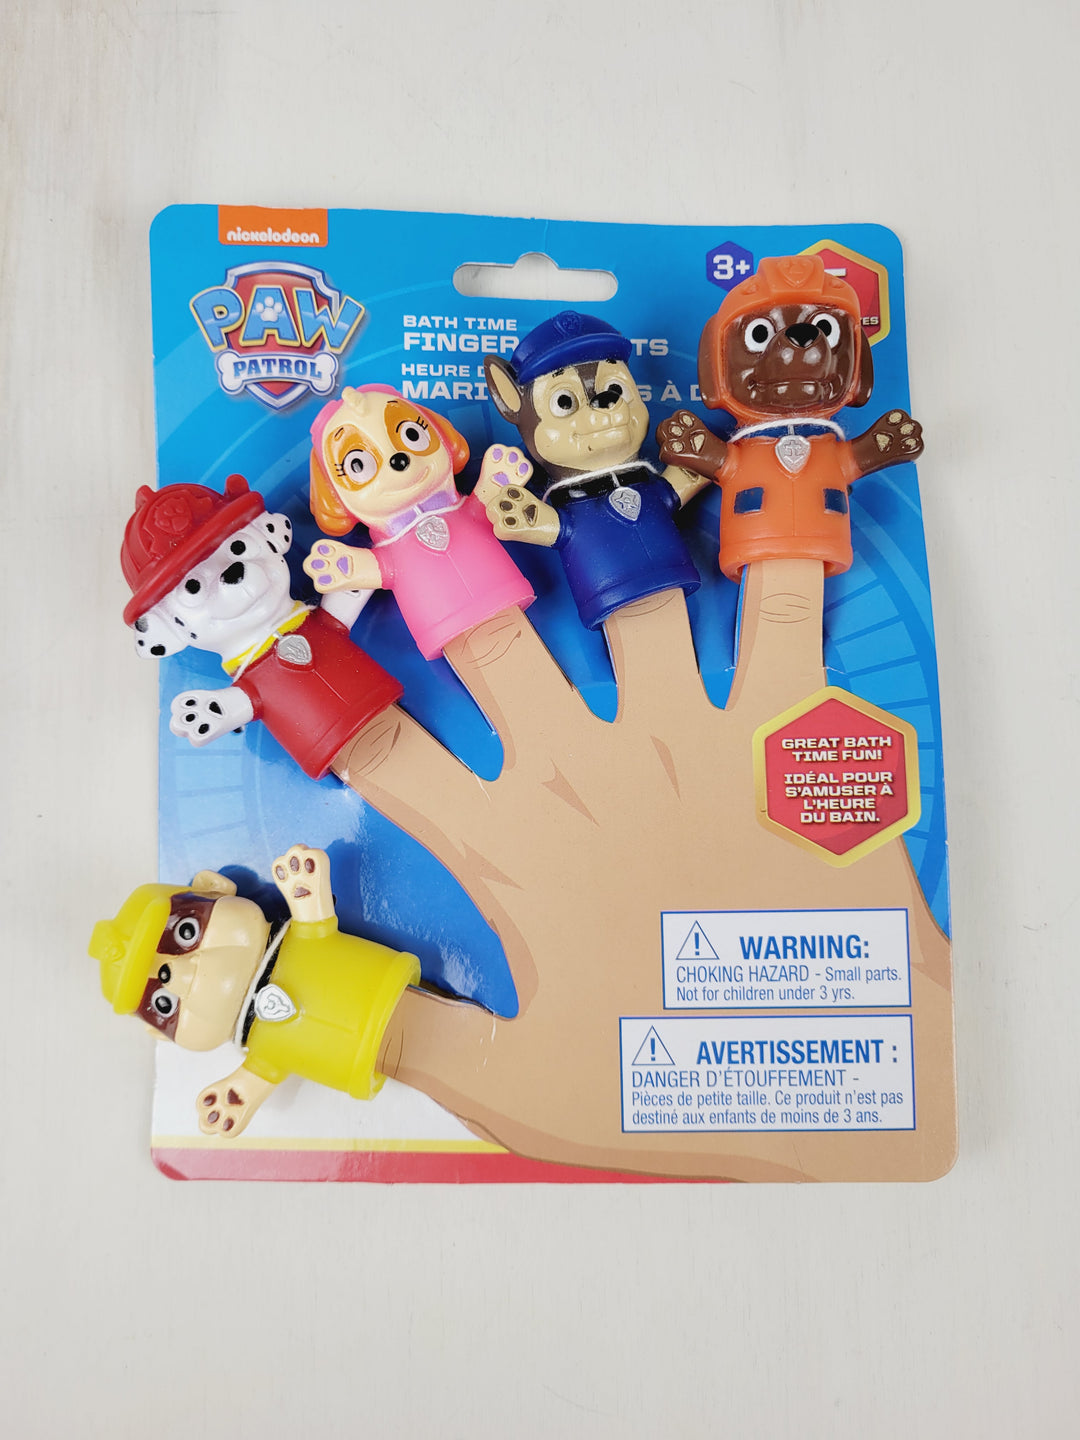 PAW PATROL BATH TIME FINGER PUPPETS NEW!